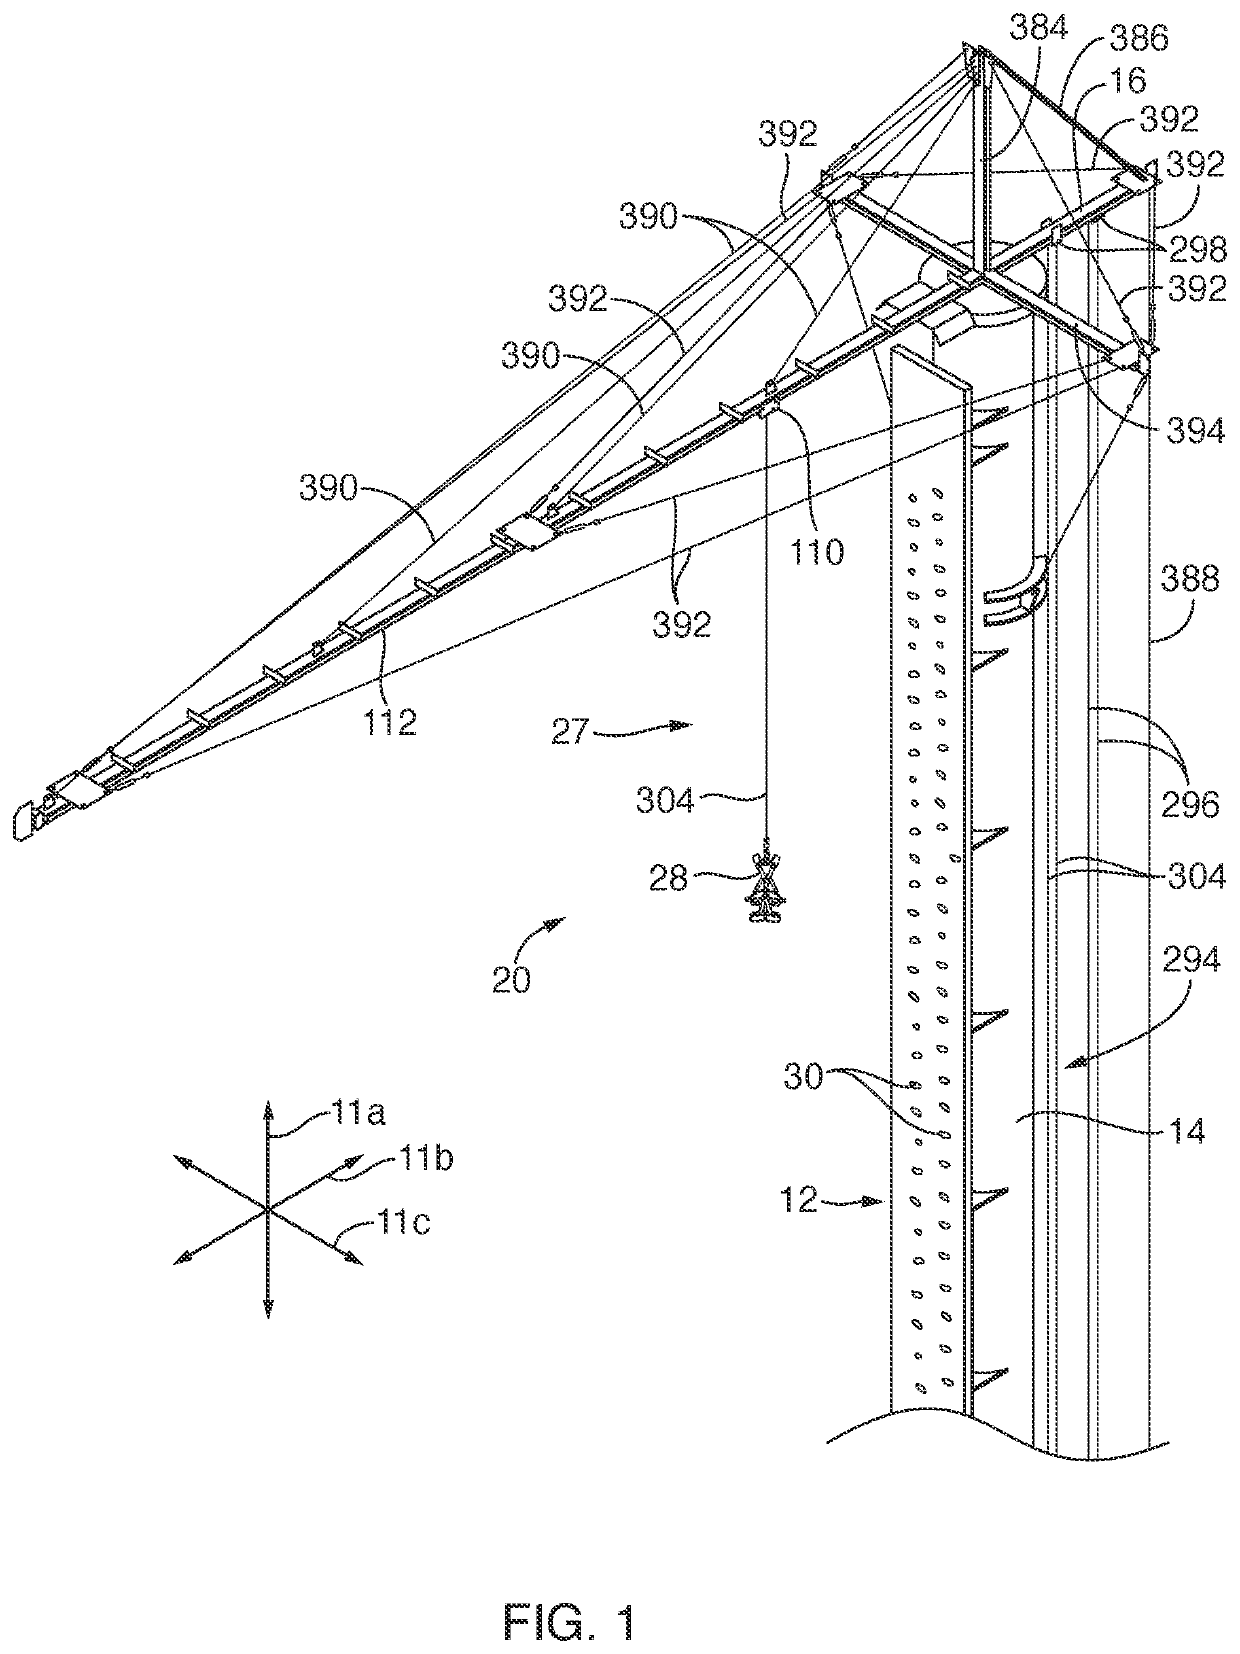 Lift, drop, swing, and attenuation apparatus and method